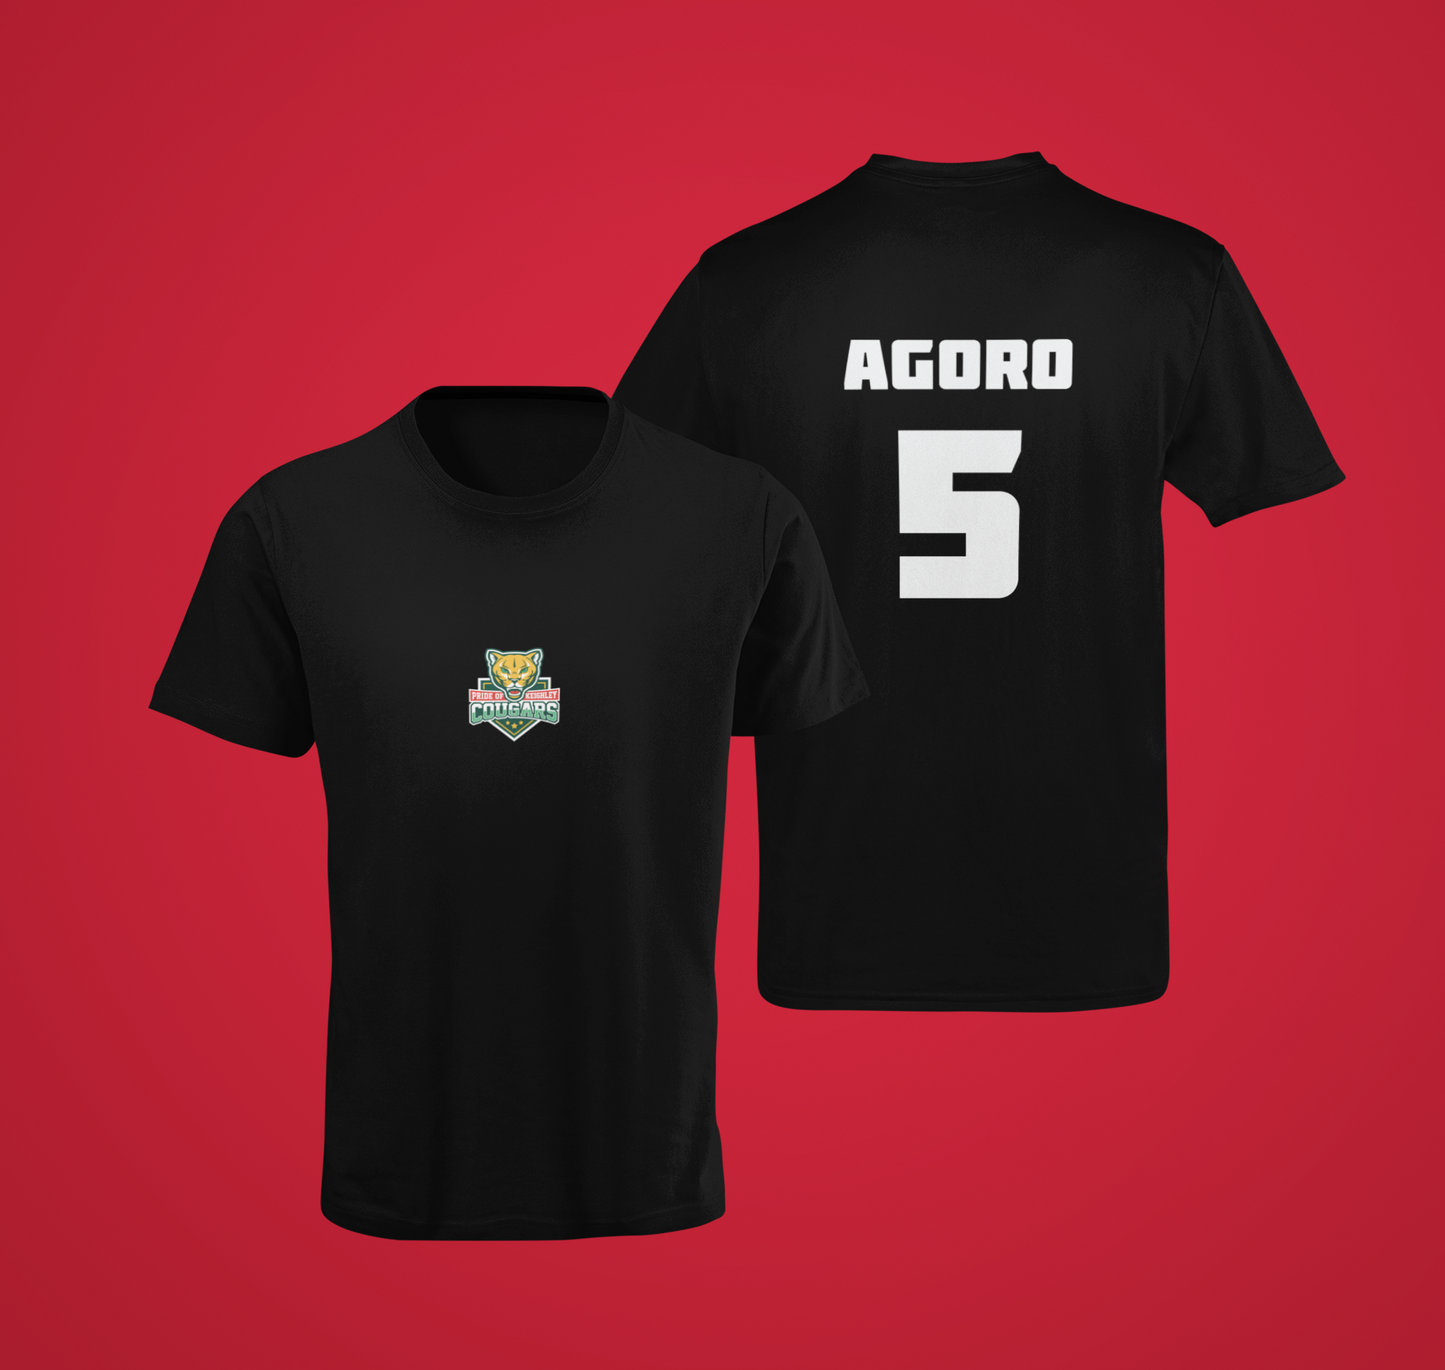 Keighley Cougars Agoro Supporters T-Shirt